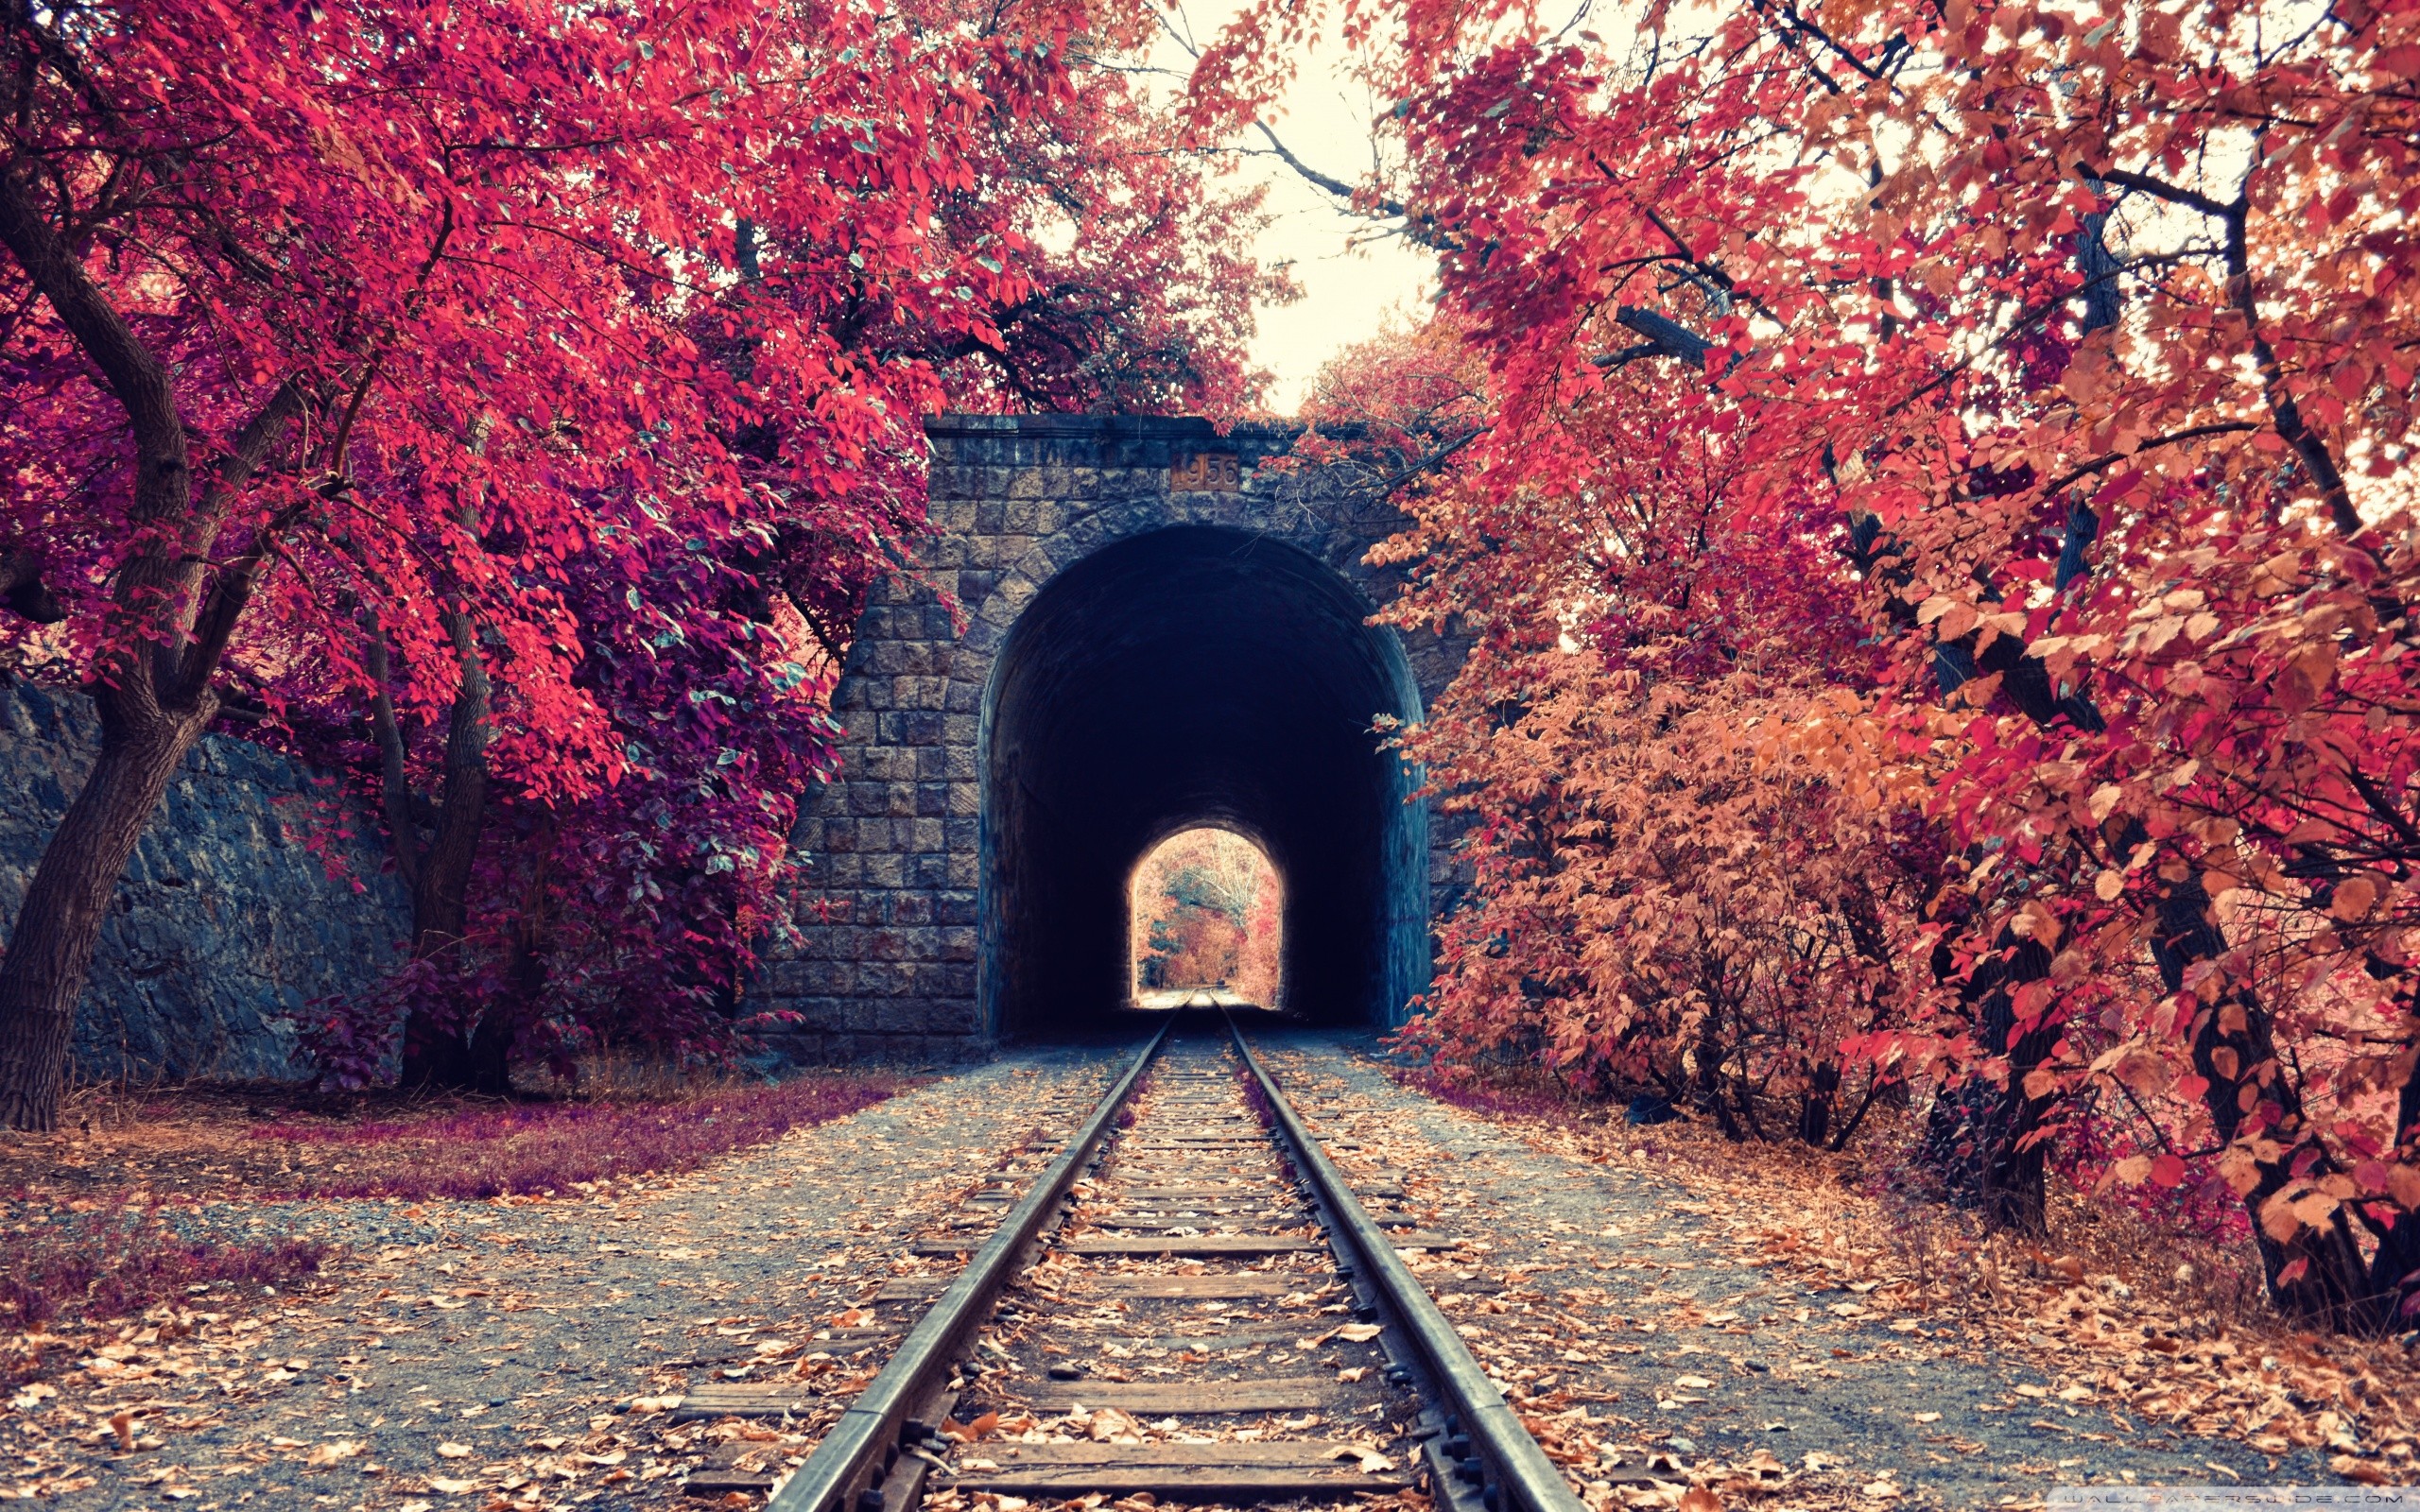 General 2560x1600 fall tunnel railway trees Armenia red red leaves